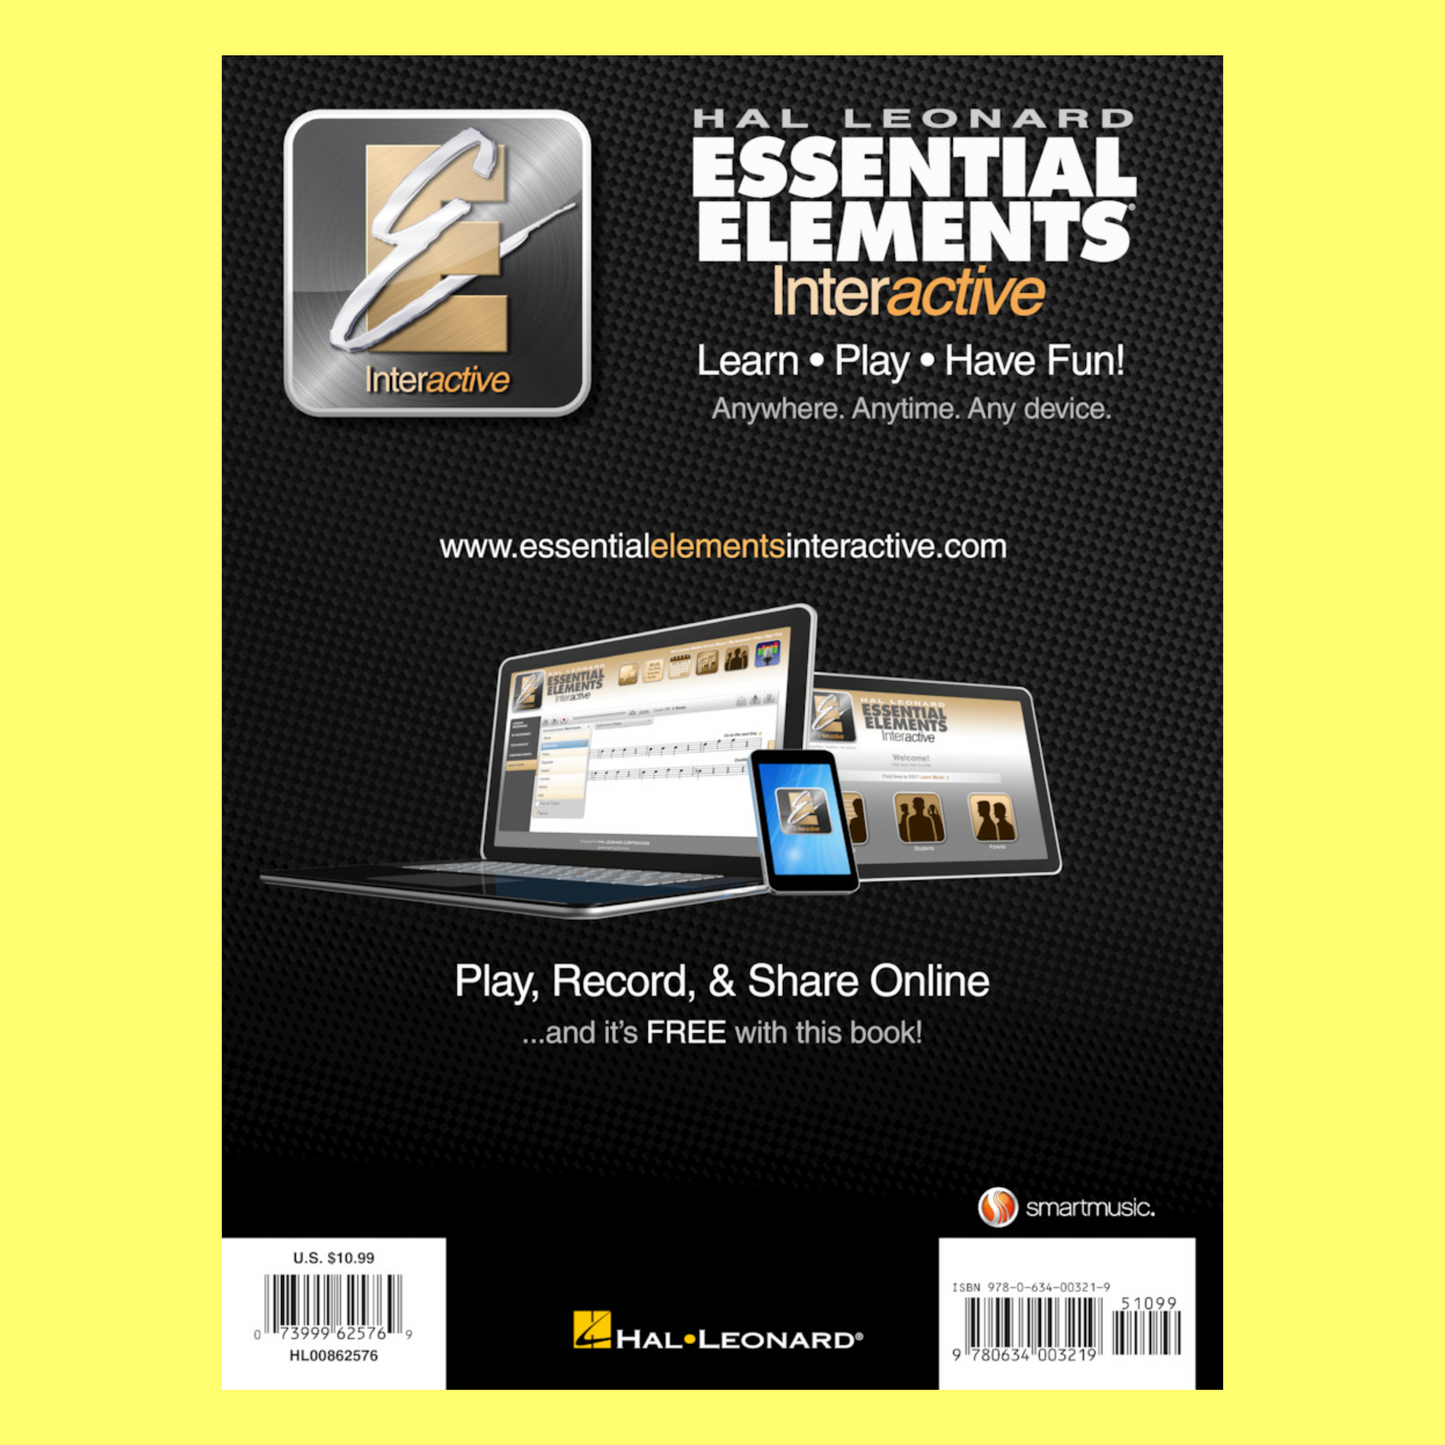 Essential Elements For Band - French Horn Book 1 (Book & EEi)